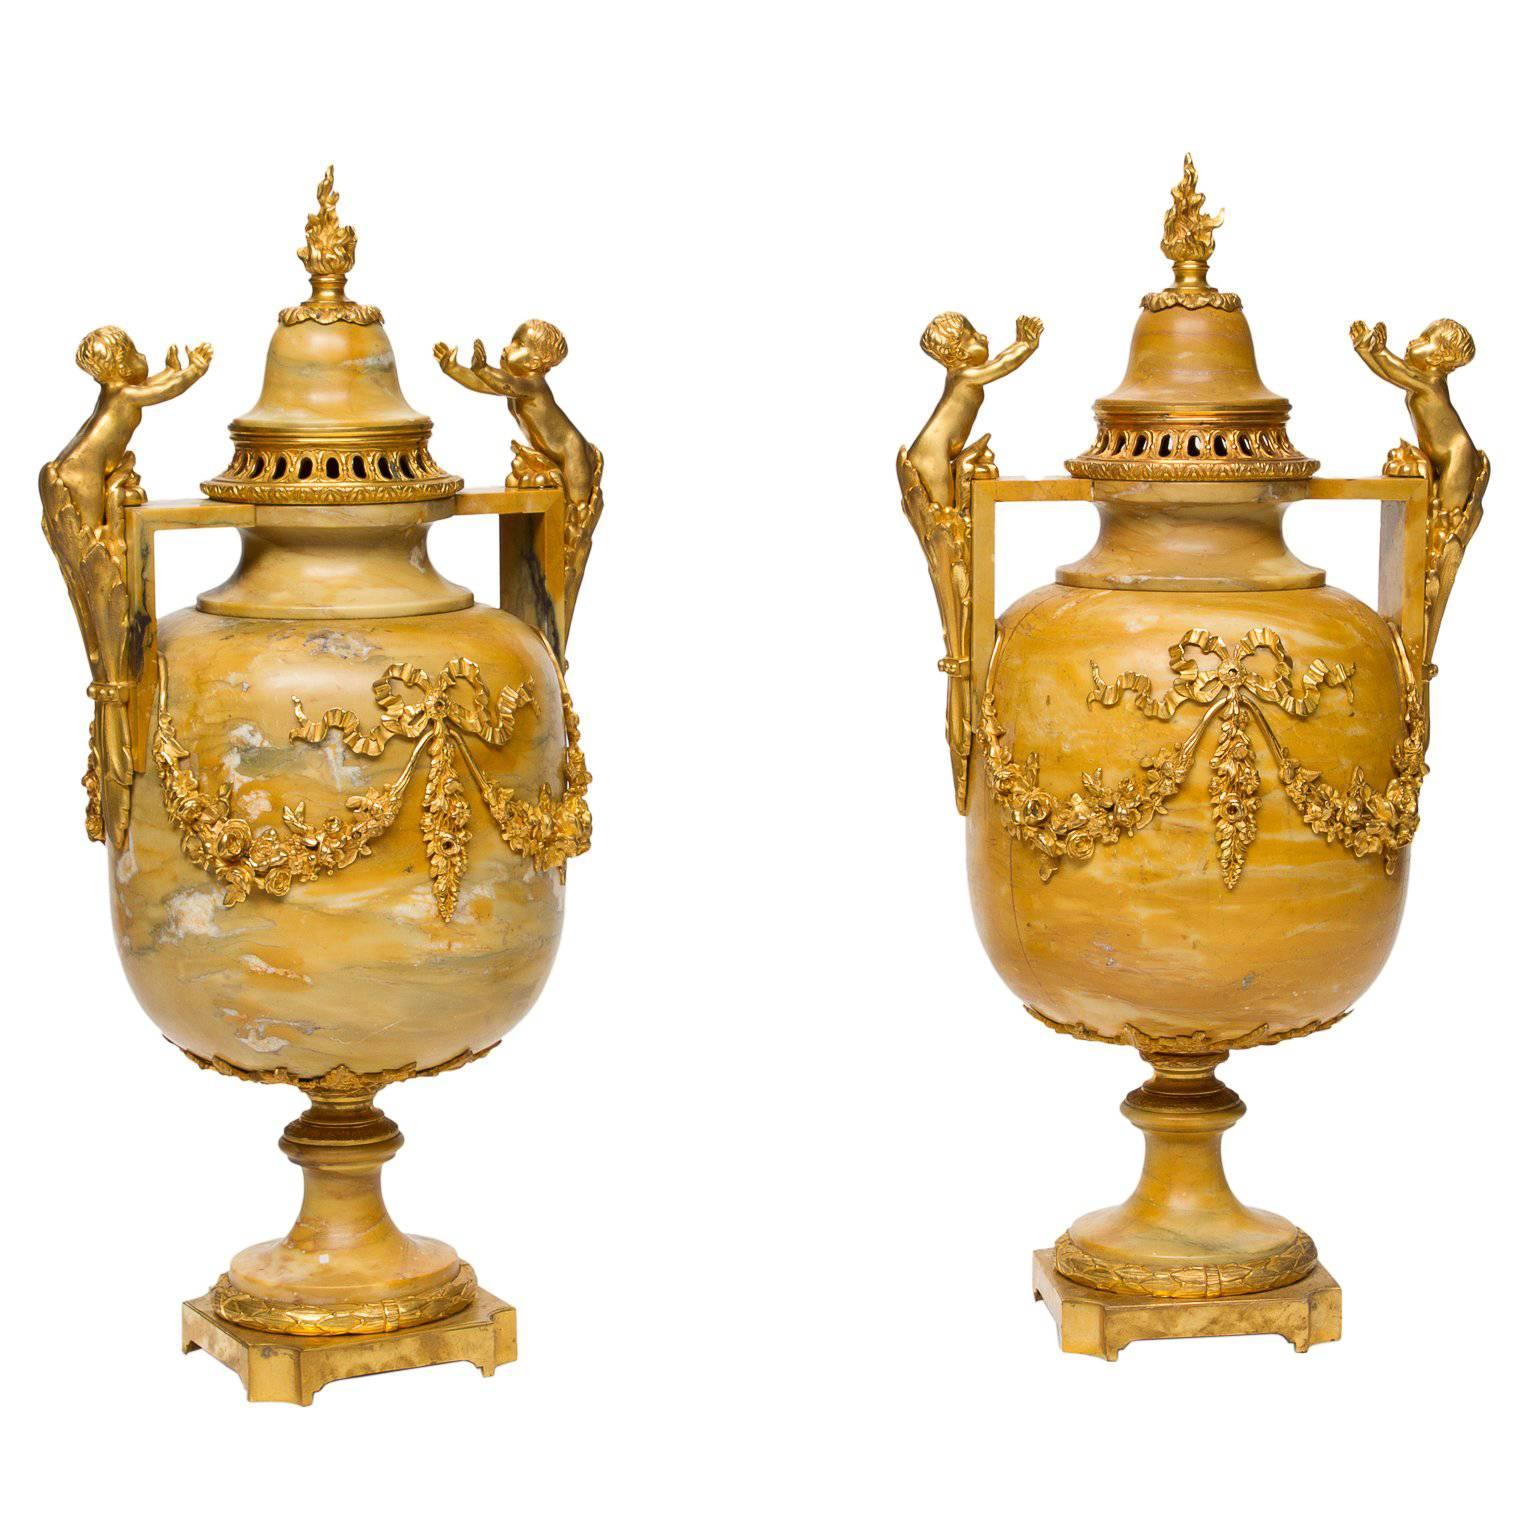 19th Century Louis XVI Marble and Ormolu Large Urns